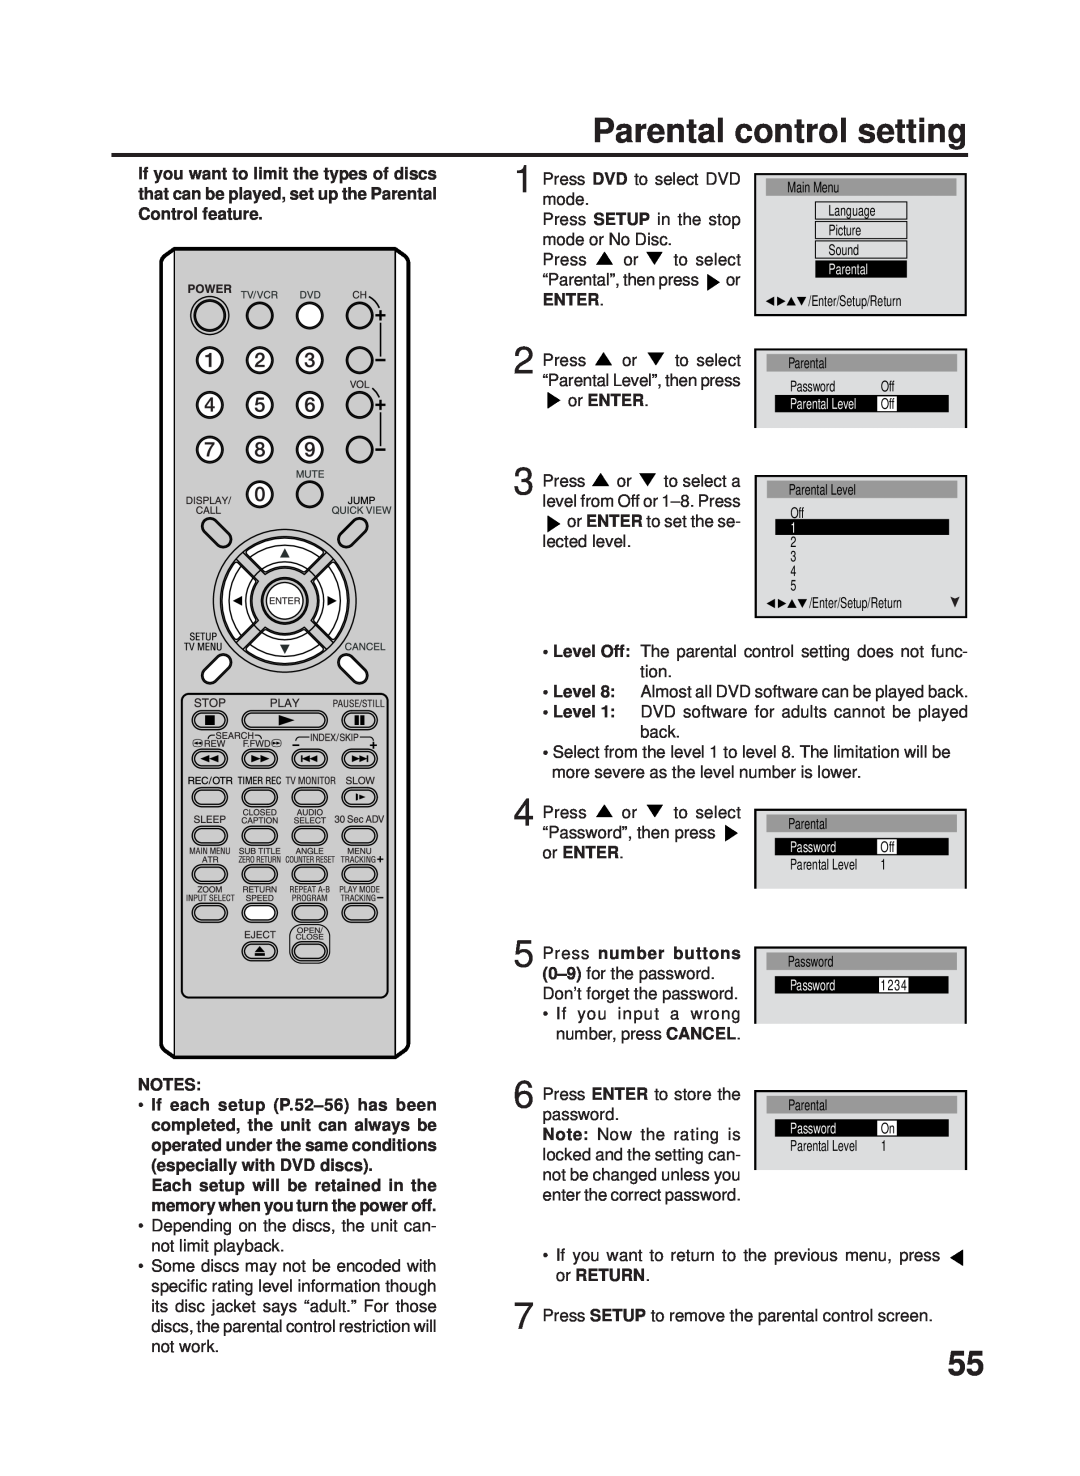 RCA 27F500TDV manual Parental control setting, Enter, If each setup P.52-56 has been, completed, the unit can always be 